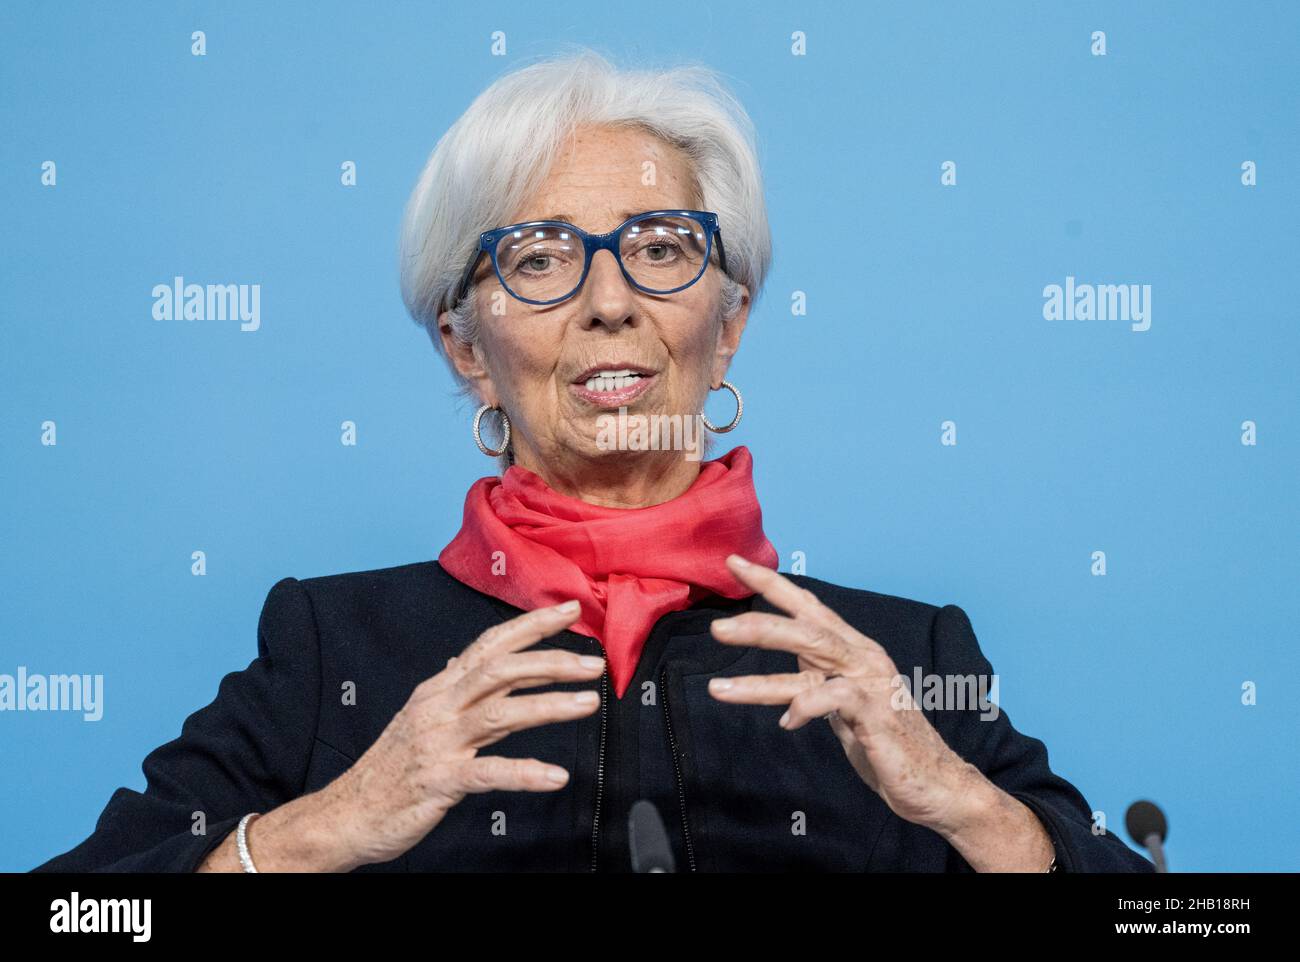 President of the European Central Bank (ECB) Christine Lagarde addresses a news conference, following a meeting of the governing council of the ECB on the eurozone monetary policy, in Frankfurt, western Germany, December 16, 2021. Thomas Lohnes/Pool via REUTERS Stock Photo